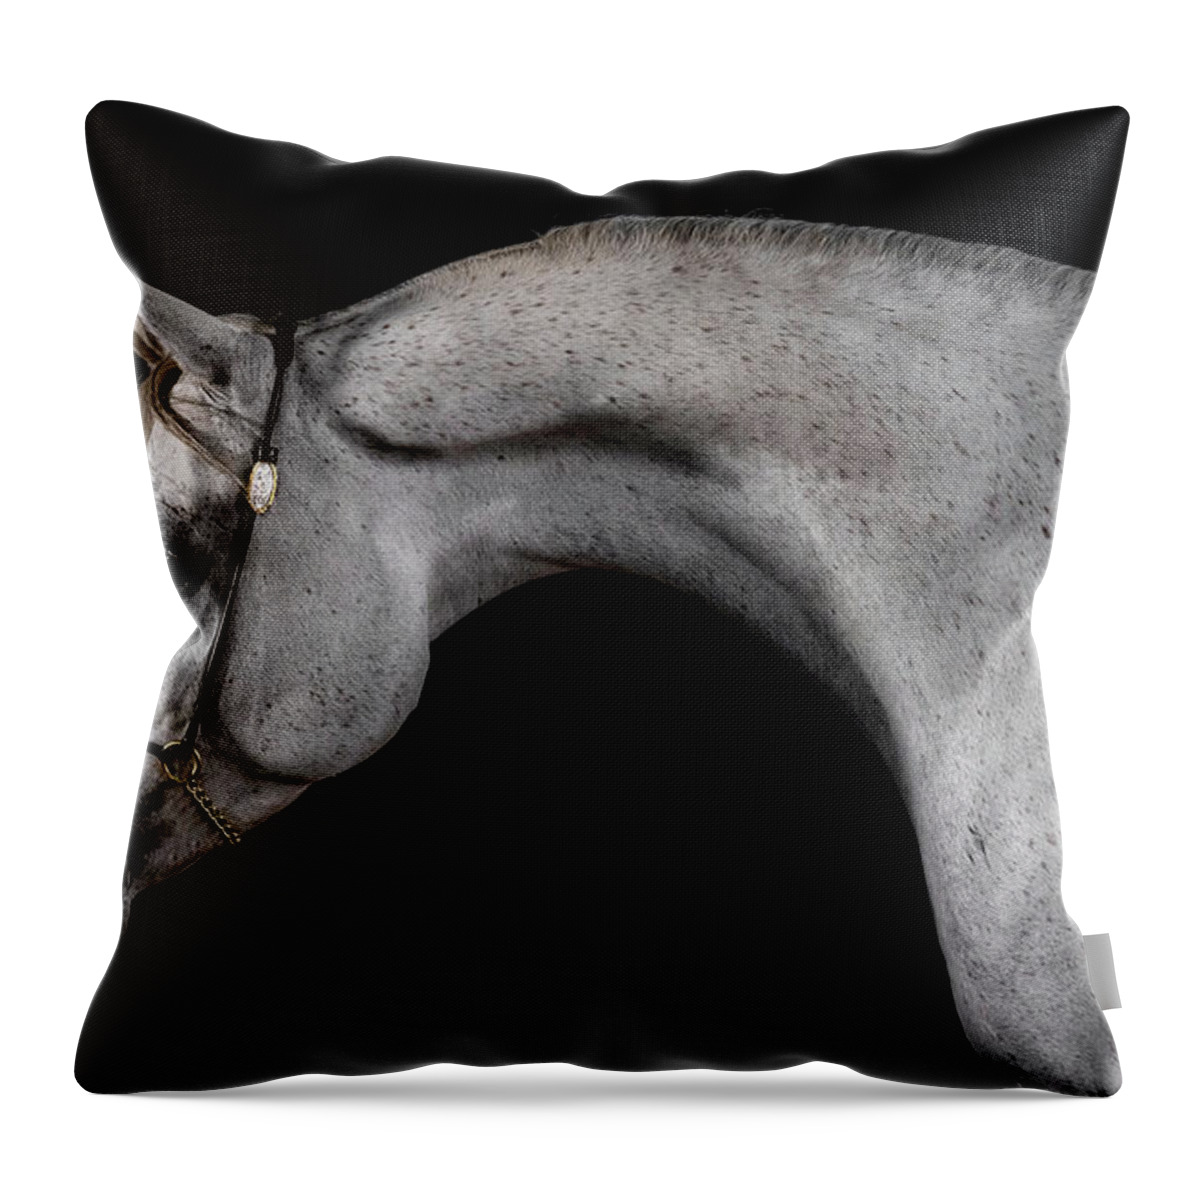 Arabian Portrait Throw Pillow featuring the photograph Arabian Portrait by Wes and Dotty Weber